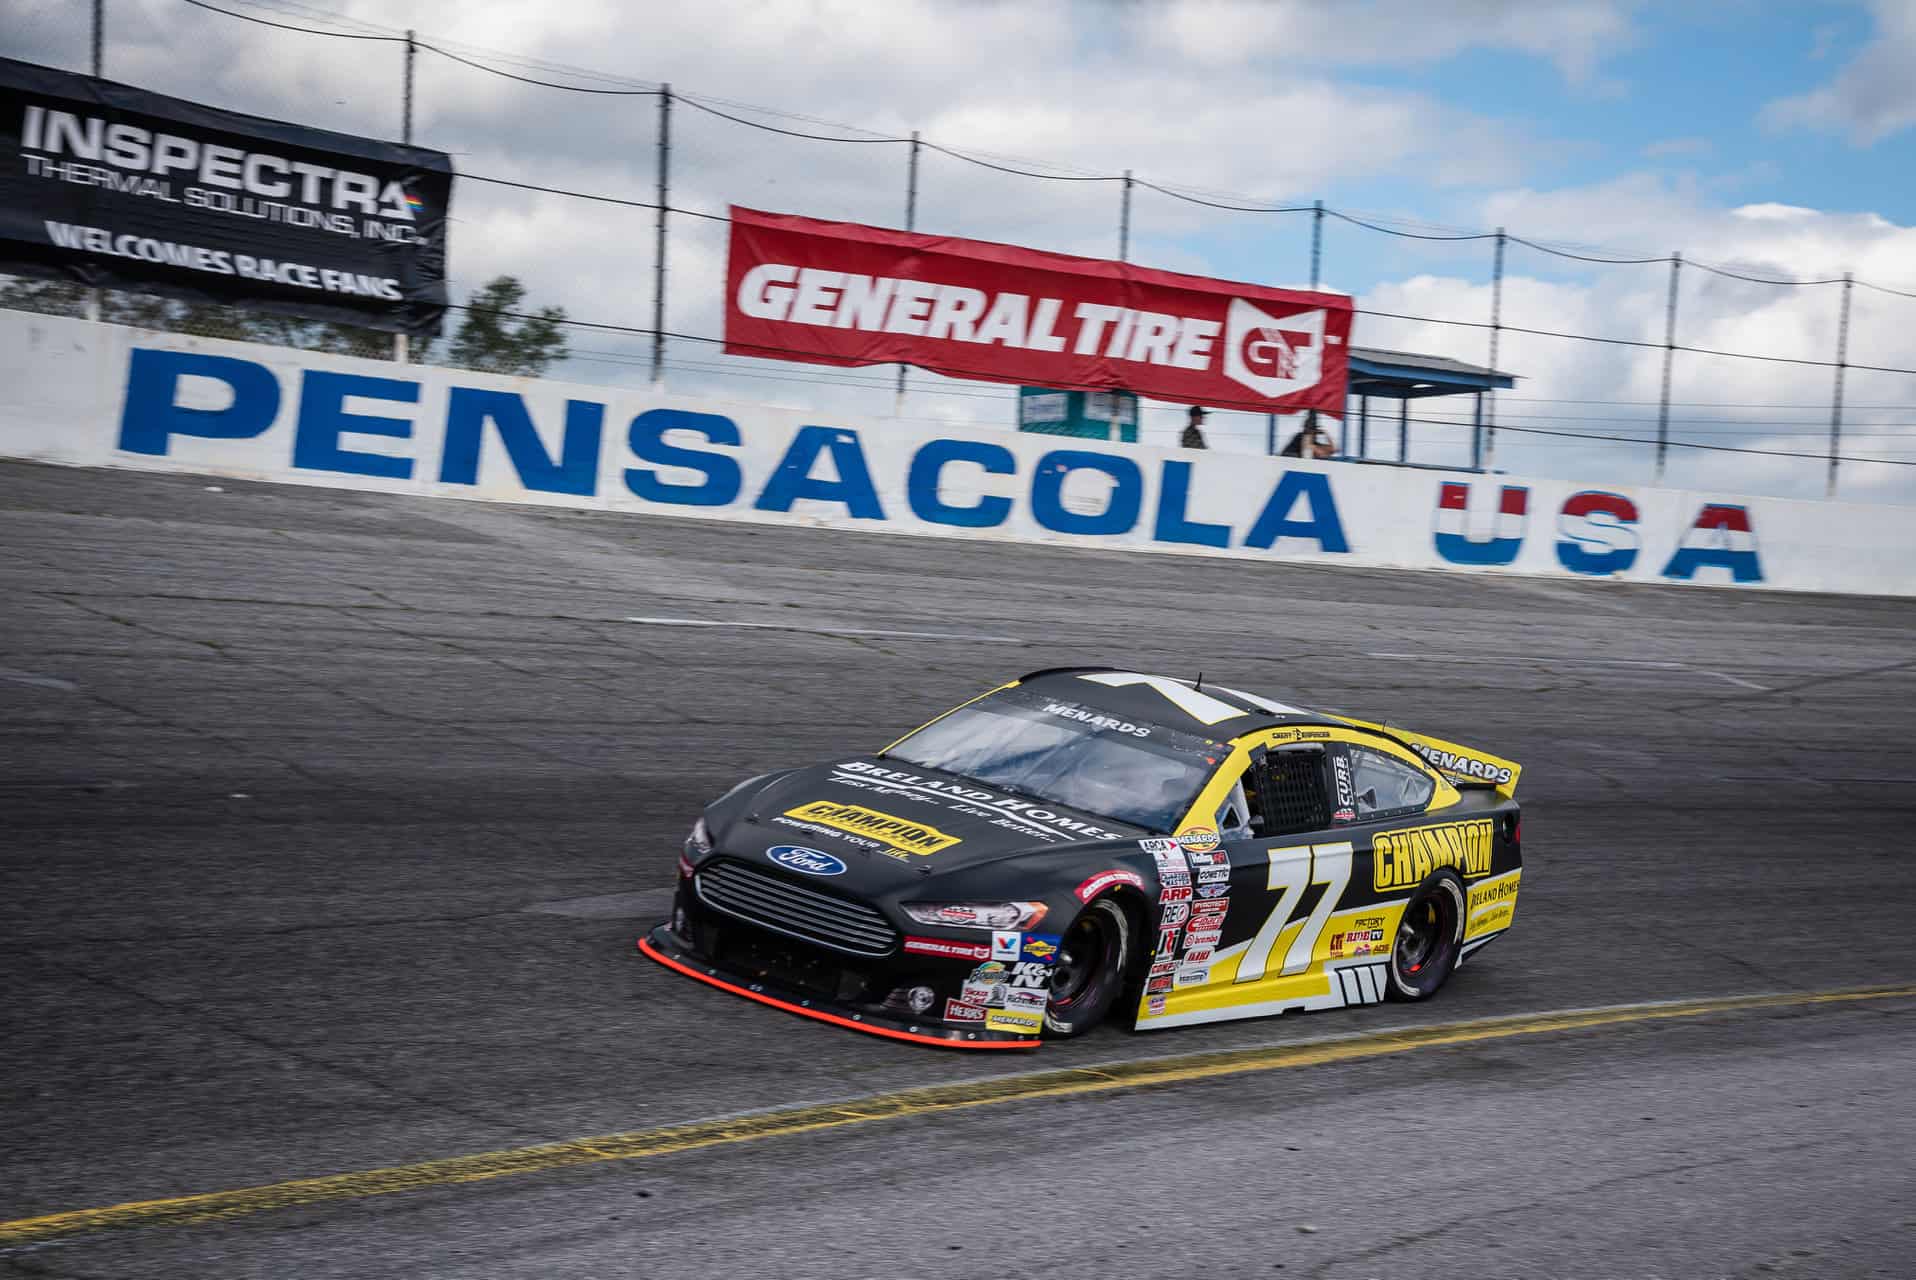 Read more about the article Grant Enfinger settles for fifth after dominating day in Pensacola